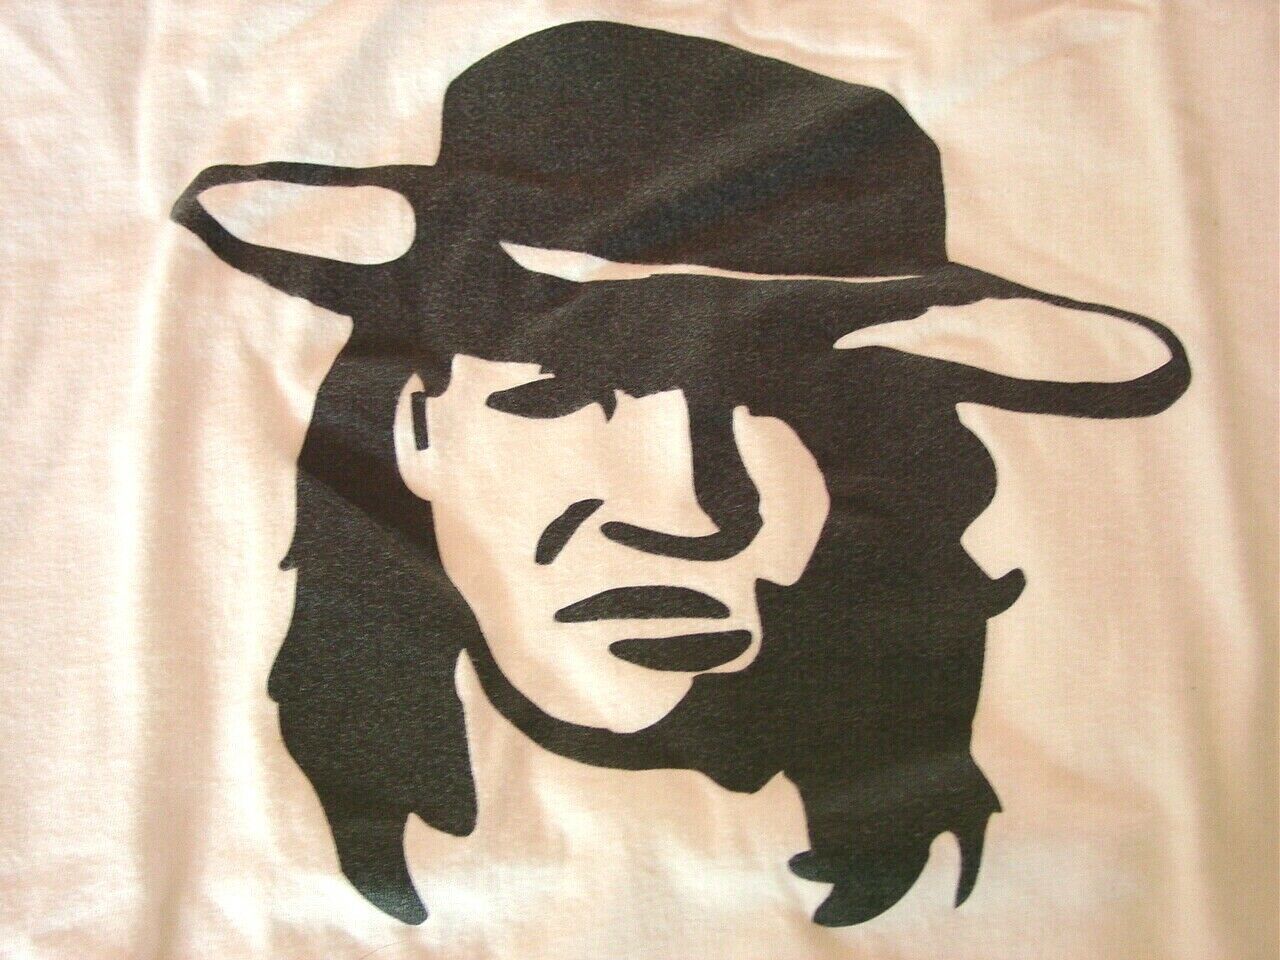 👀VINTAGE STEVIE RAY VAUGHN LG WHITE HANES BEEFY T SHIRT WILL NOT FADE LOOK👀